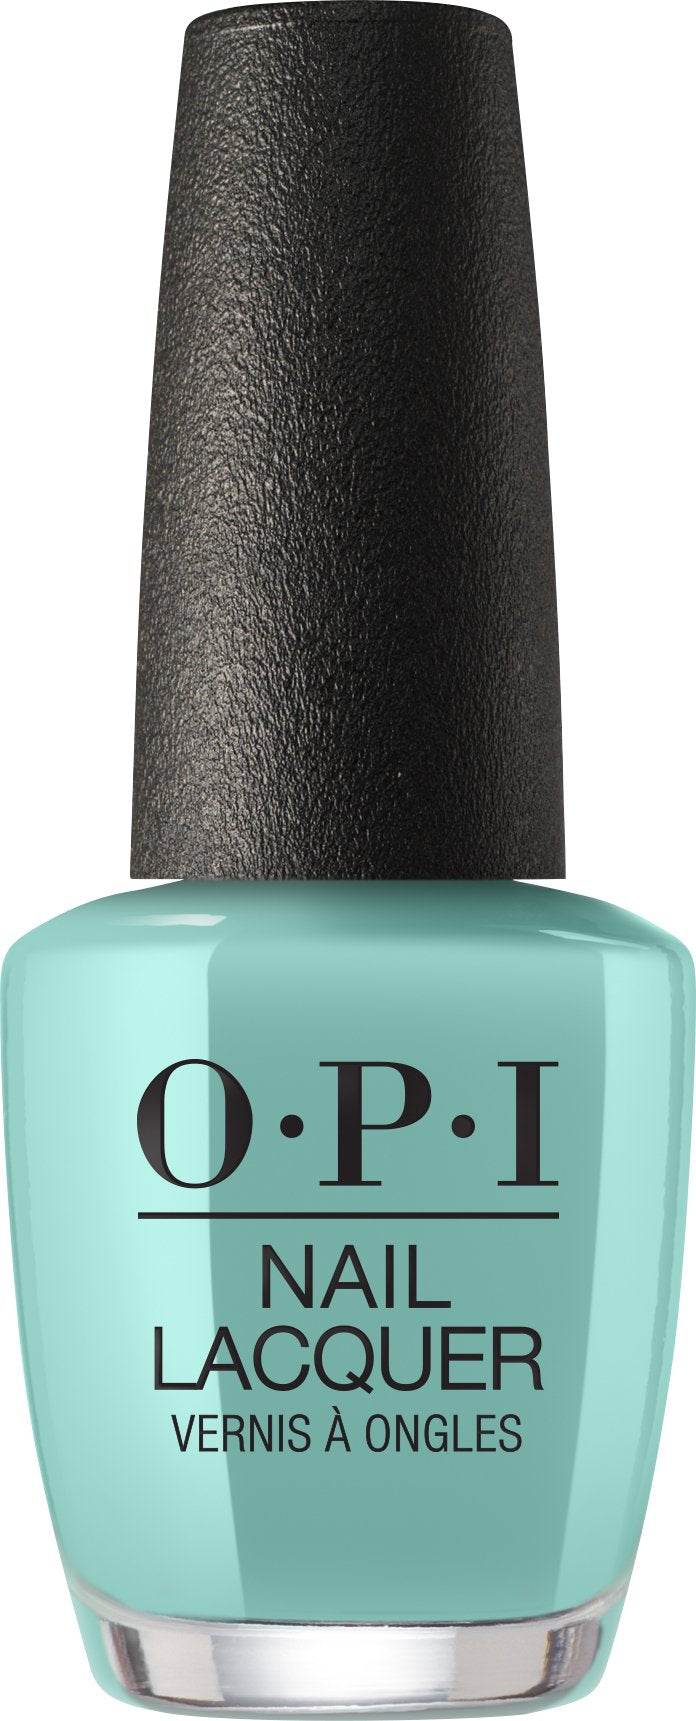 OPI Nail Lacquer - Verde Nice To Meet You - MEXICO